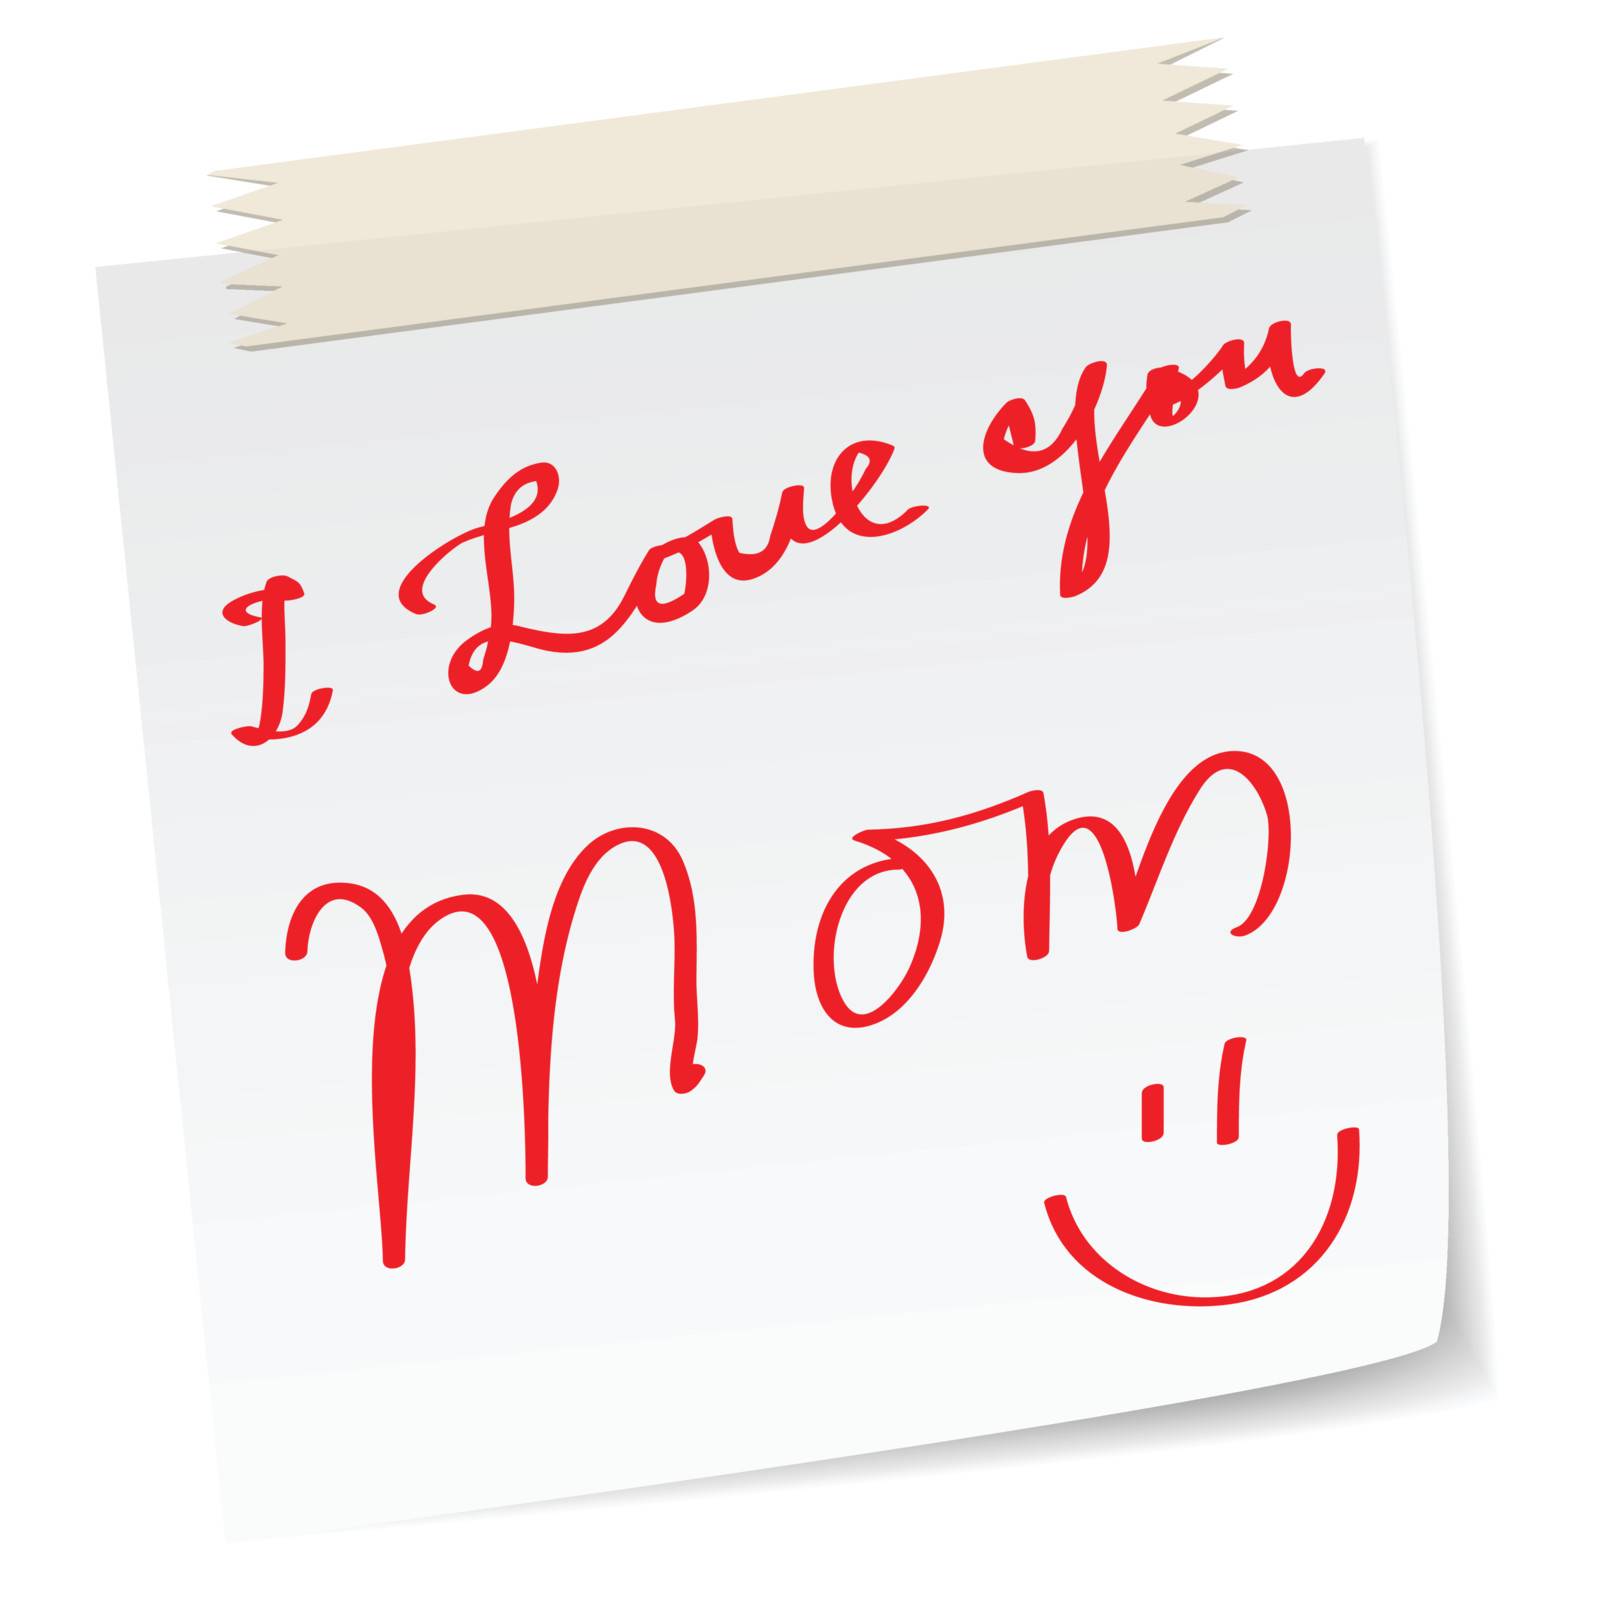 mother day greetings on a paper notes, with handwritten message.